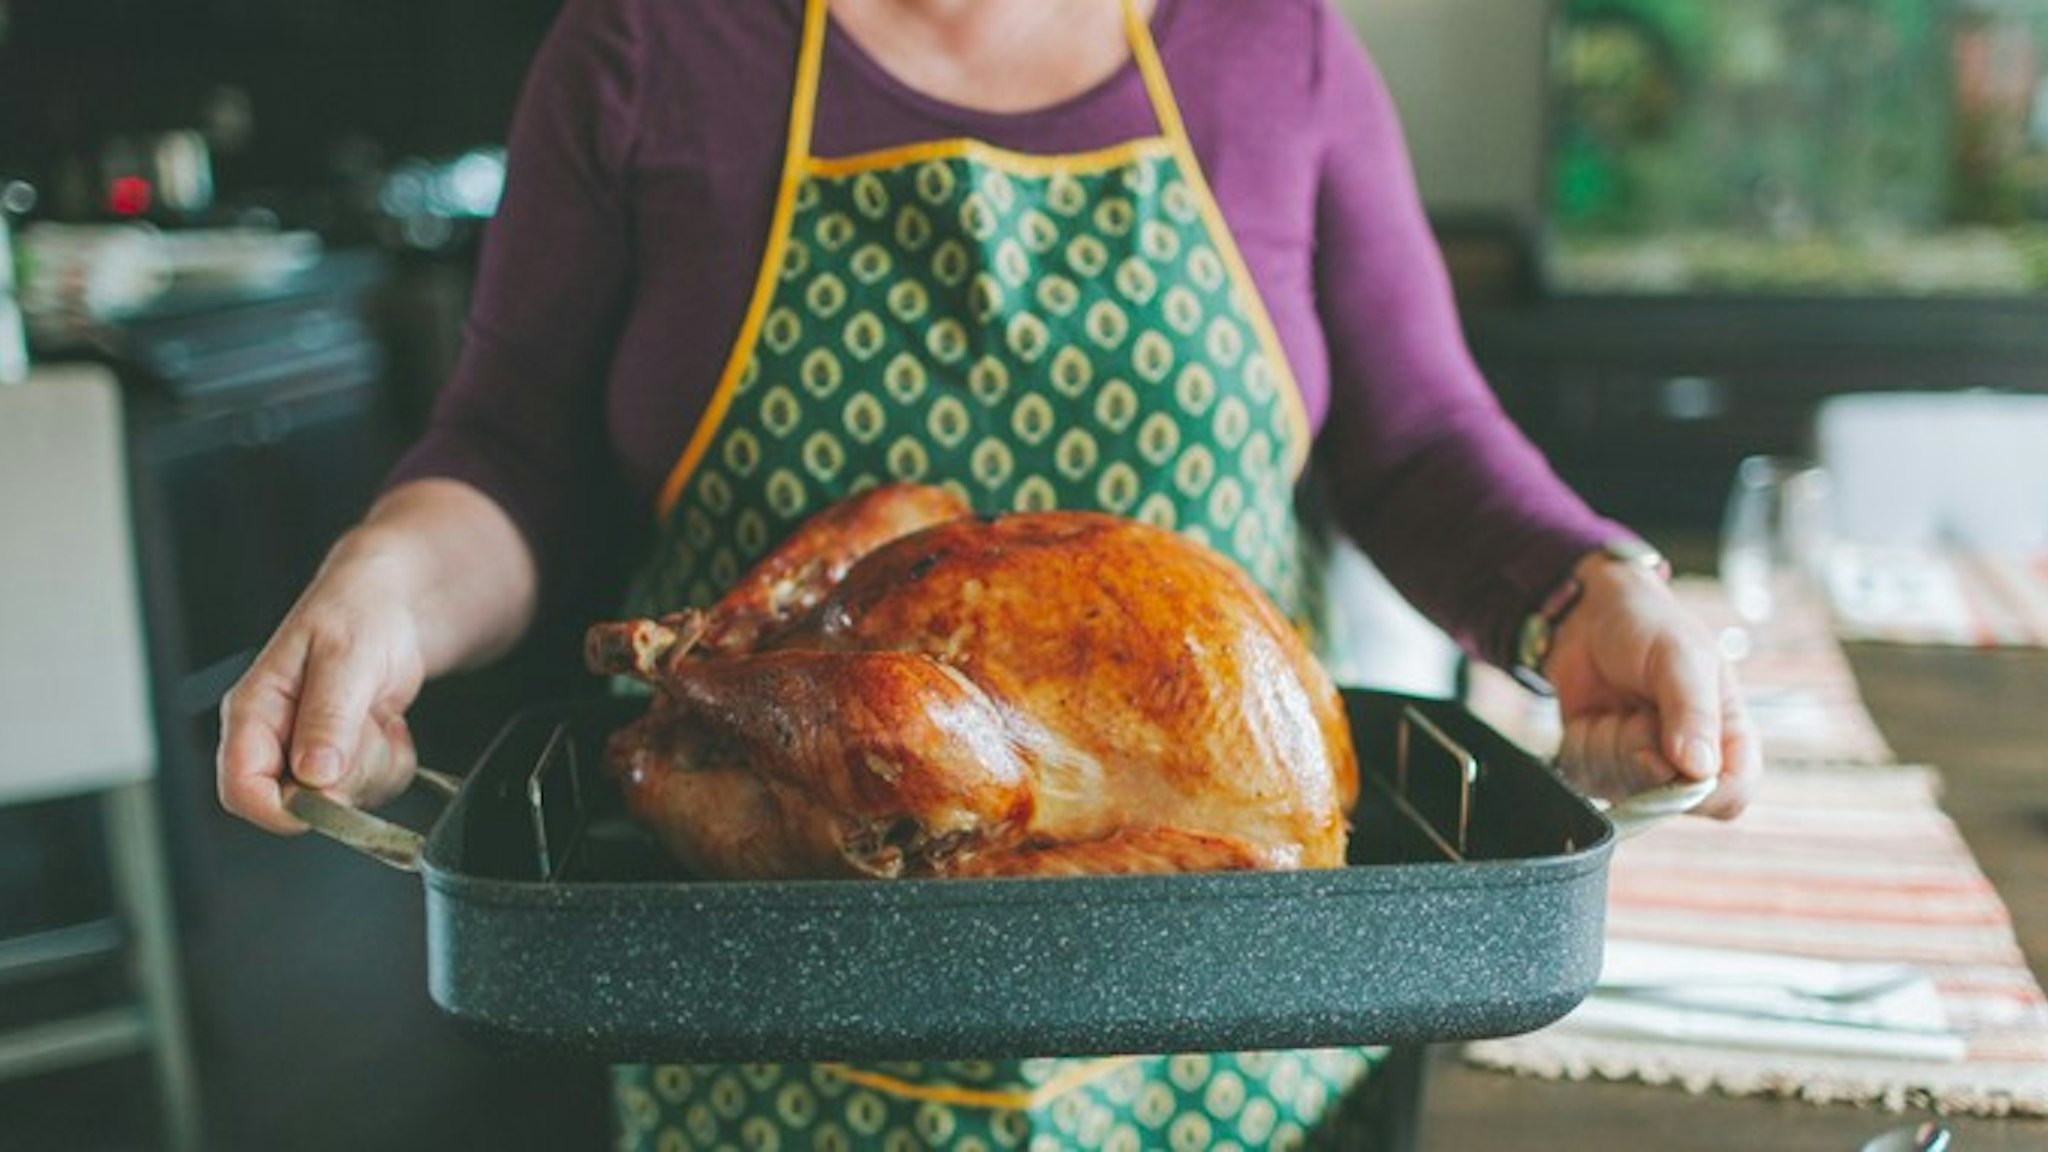 Midsection Of Woman Carrying Tray With Roast Turkey In Kitchen